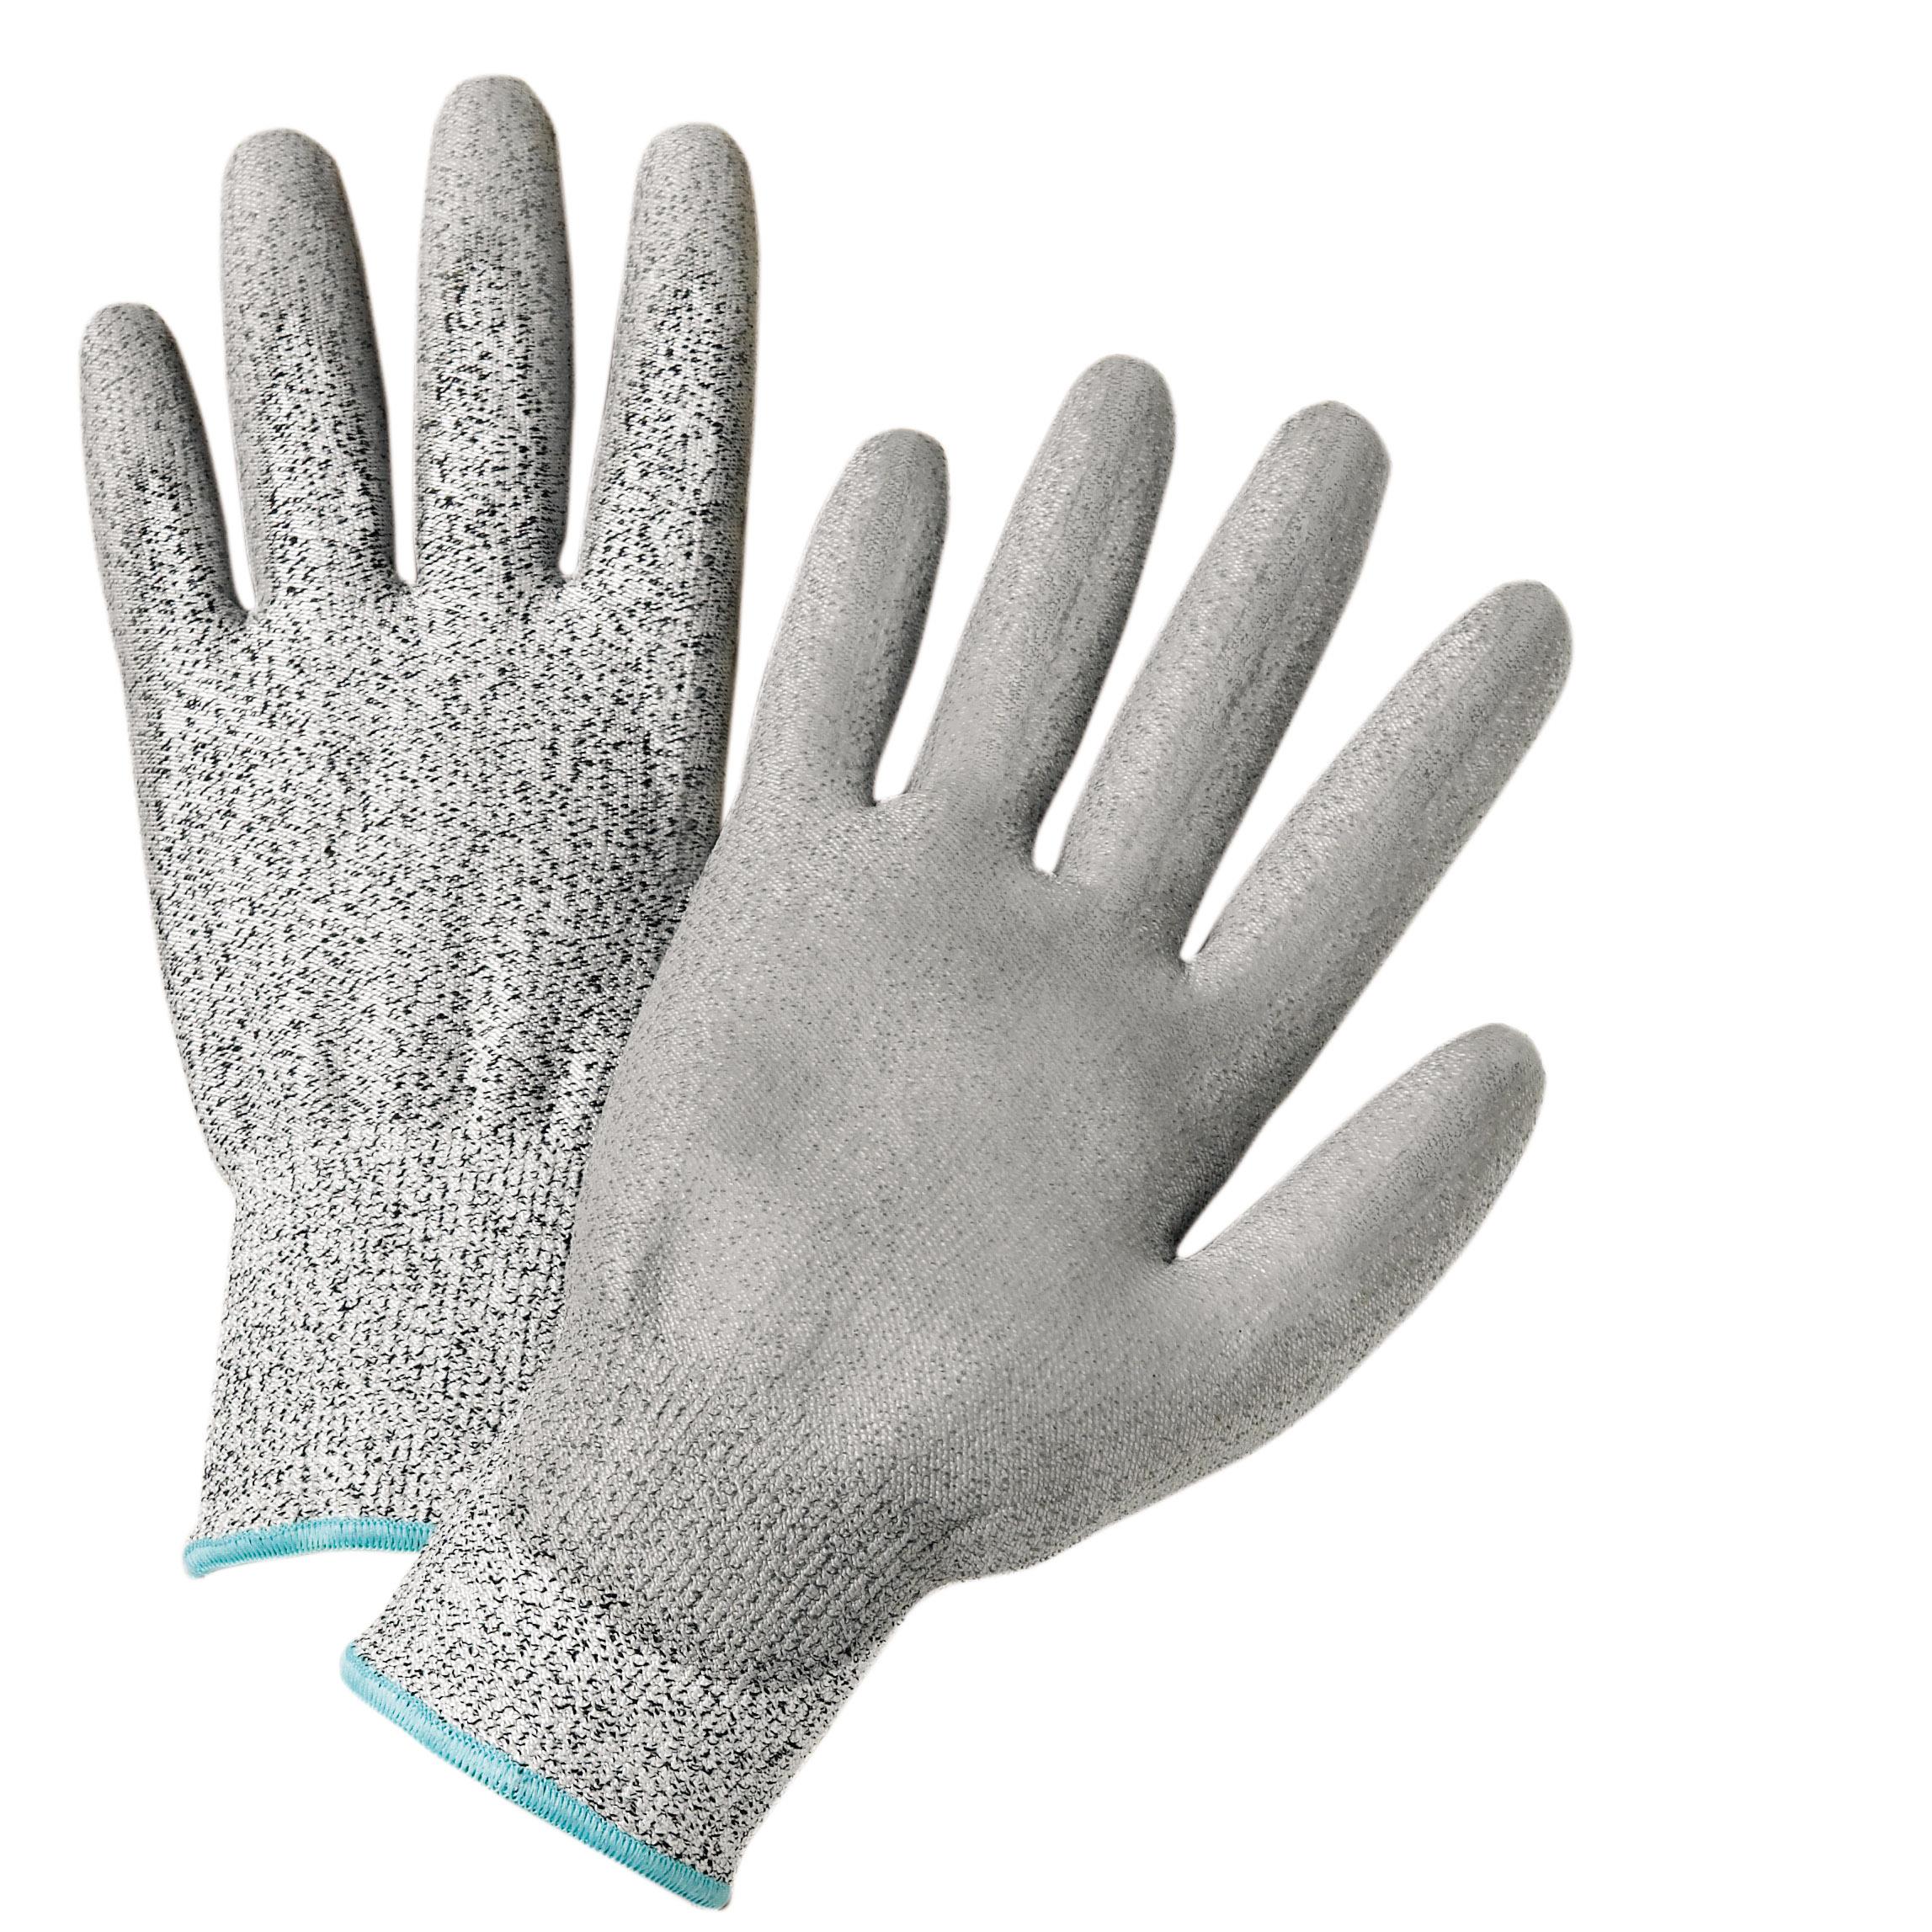 palm coated gloves